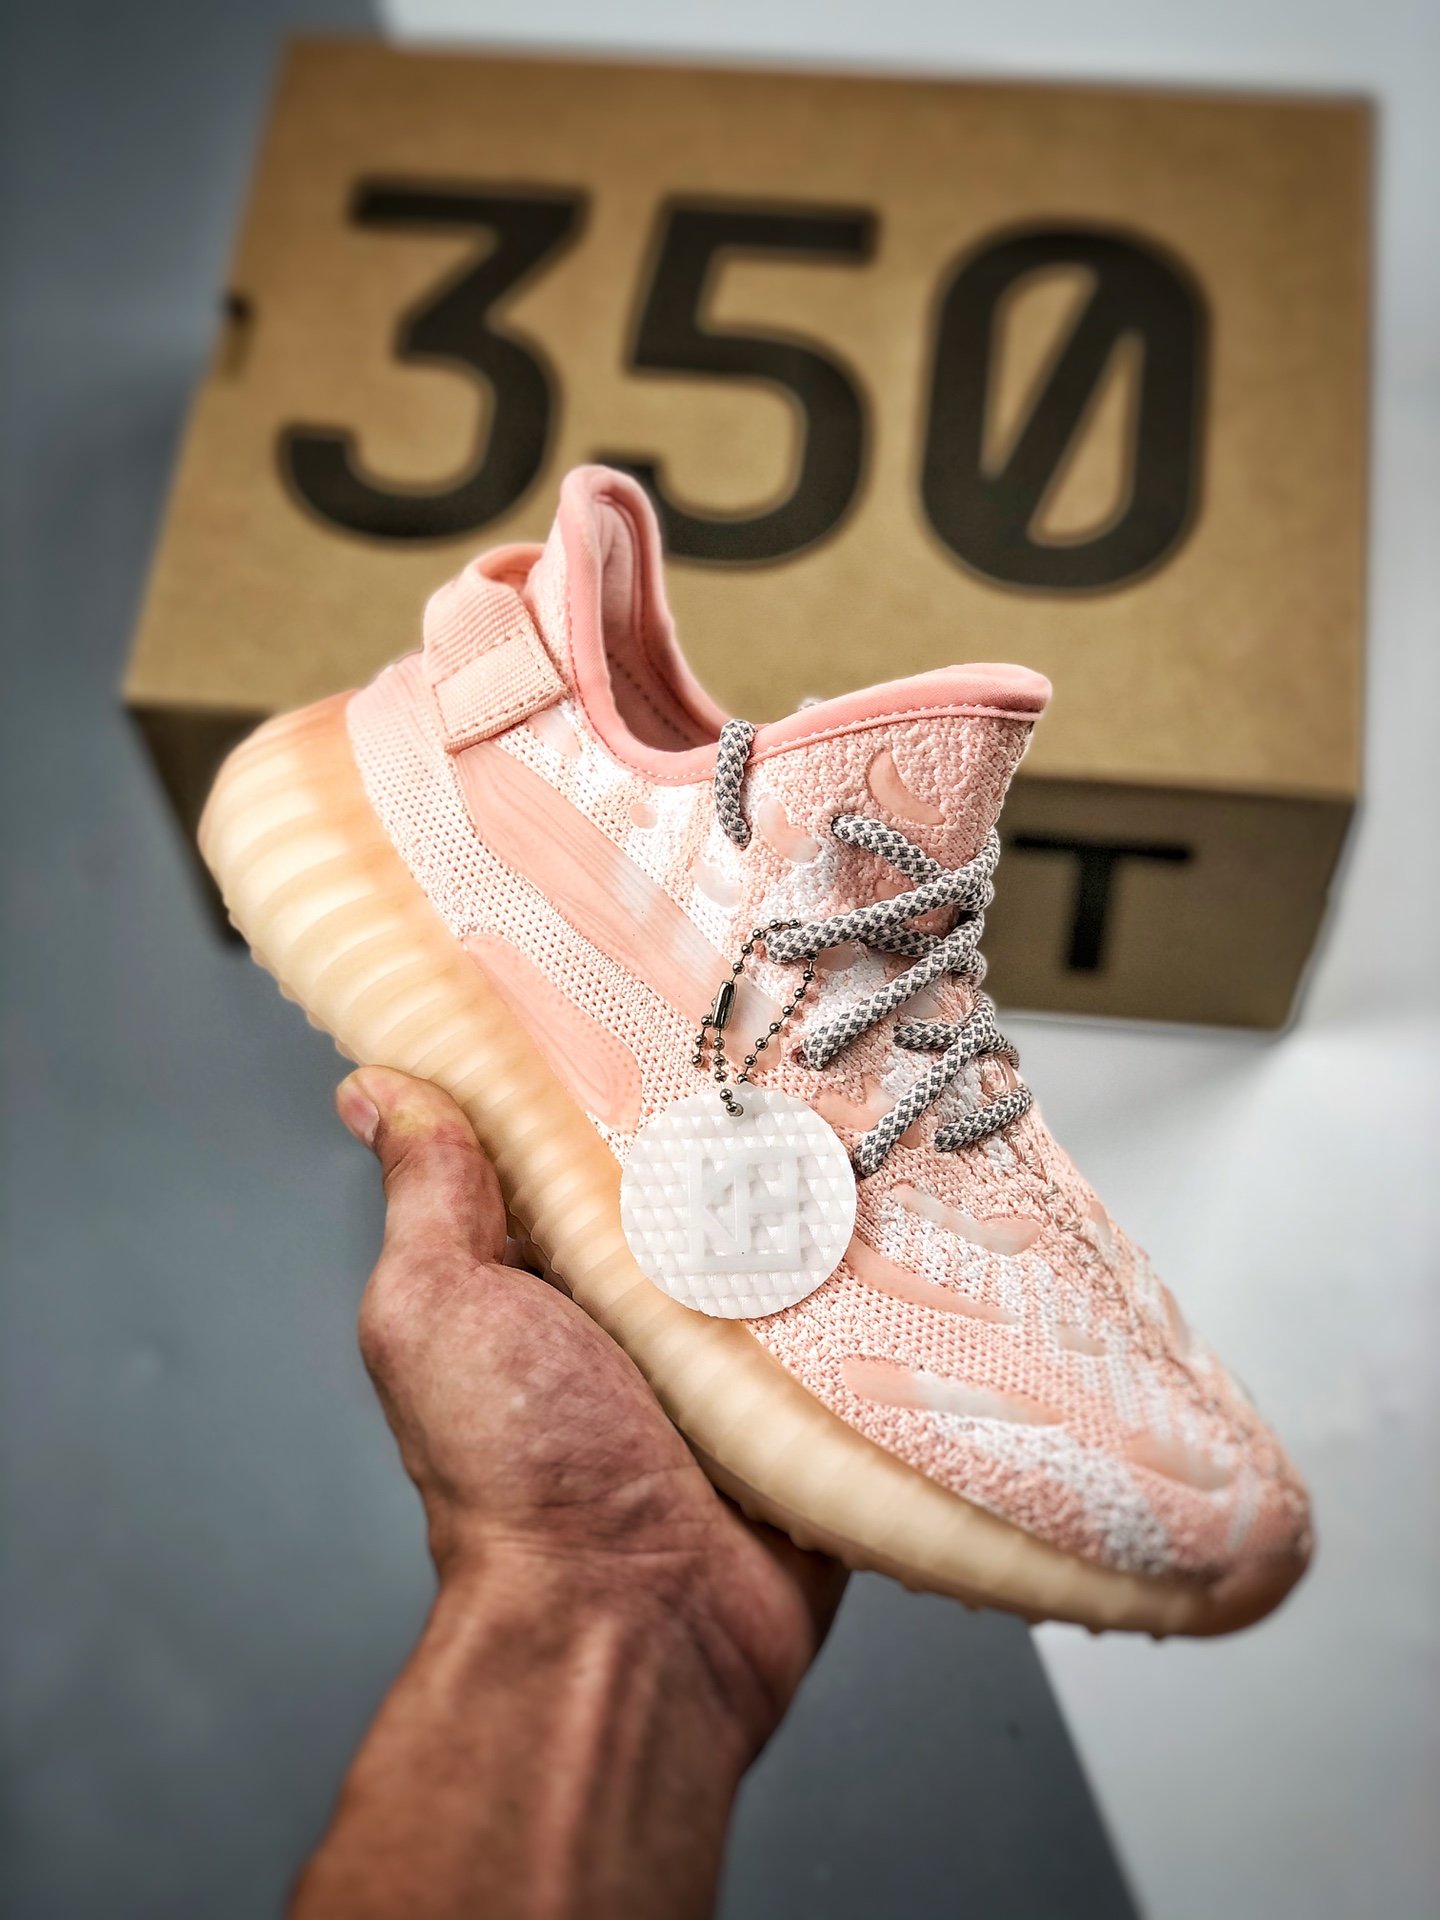 2020 cheap Adidas yeezy Boost 350 V2 Sneakers For Women # 225178, cheap Adidas Yeezy Shoes, only $99!